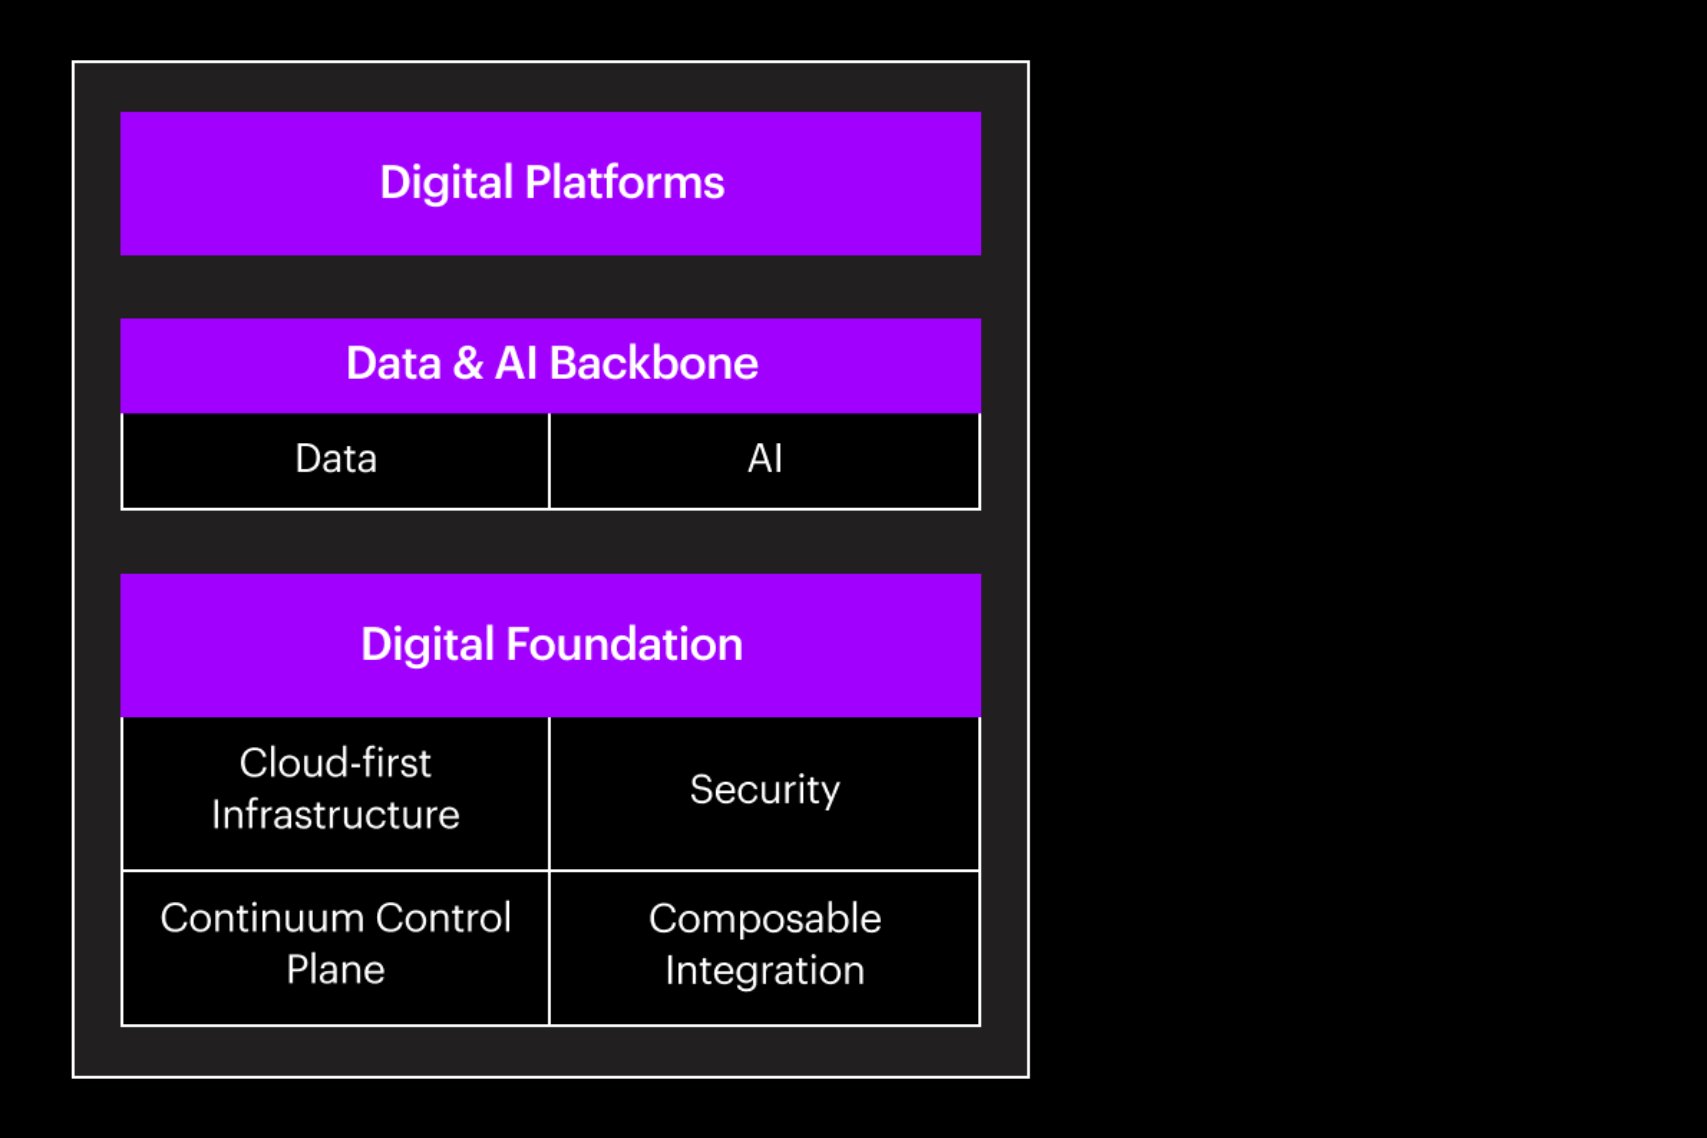 Demystifying the digital core: A digital core fit for continuous reinvention includes three distinct groups of technologies that constantly interact with each other.